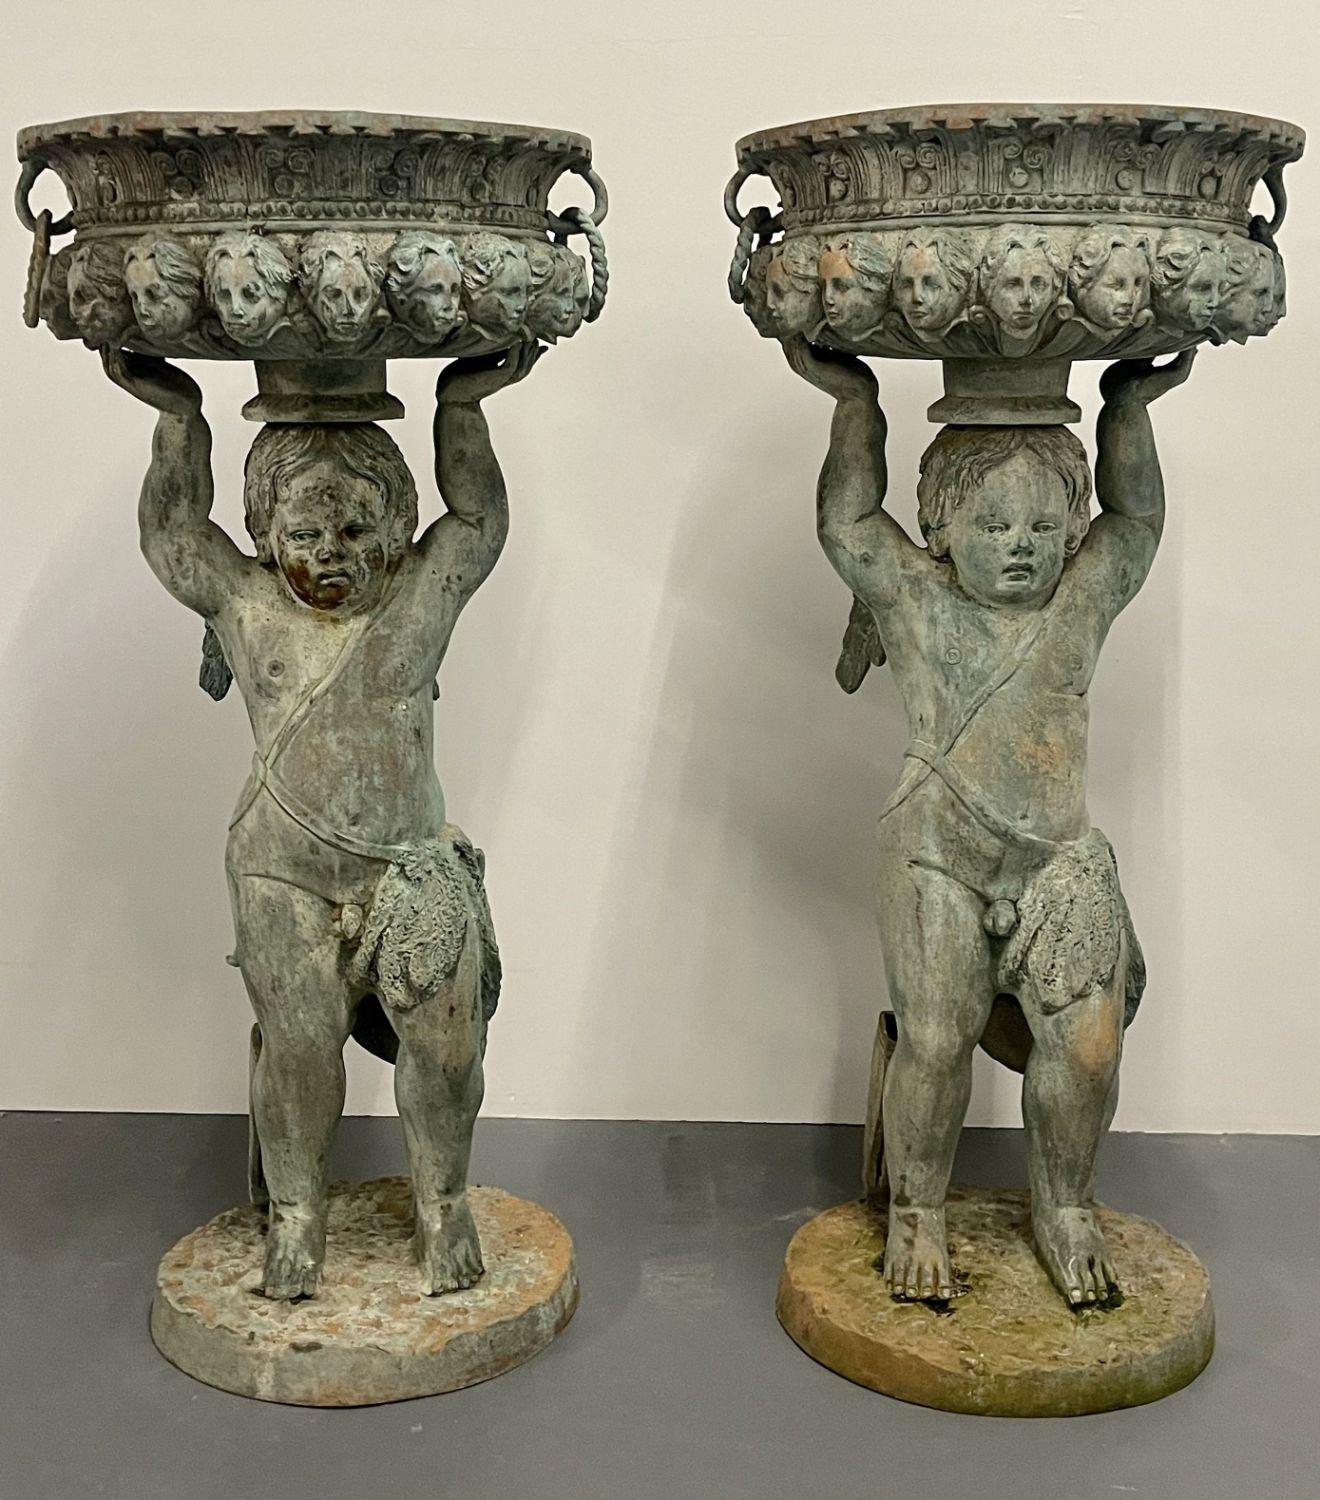 Pair of large bronze Cherub planters, Roman, Greek Neoclassical. A finely case pair of planters each having an basket with handles having faces around the apron supported by a bare breasted cherub holding up the pot. The pair nicely